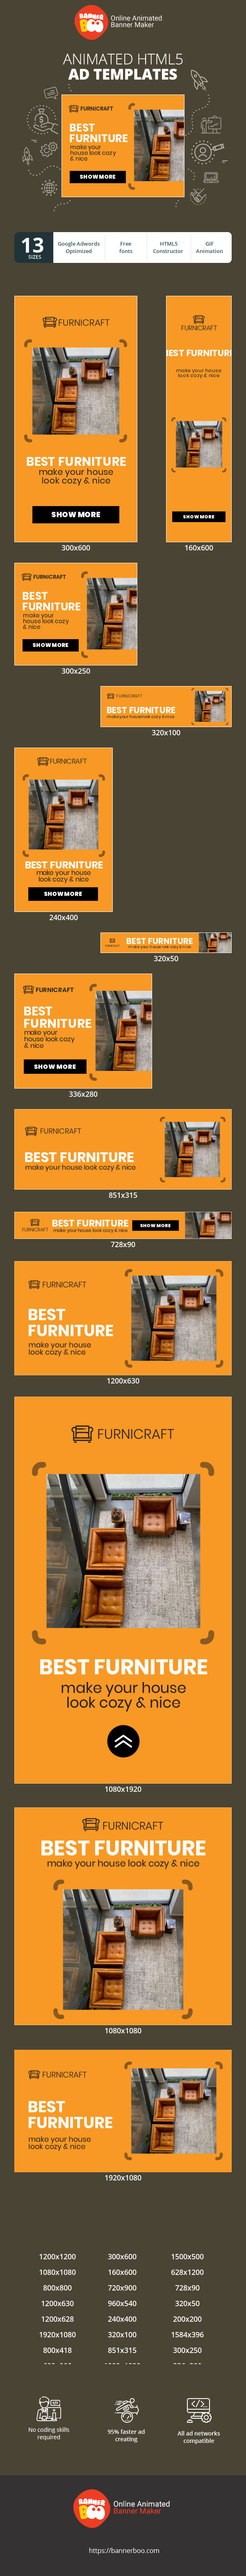 Banner ad template — Best Furniture — Make Your House Look Cozy & Nice